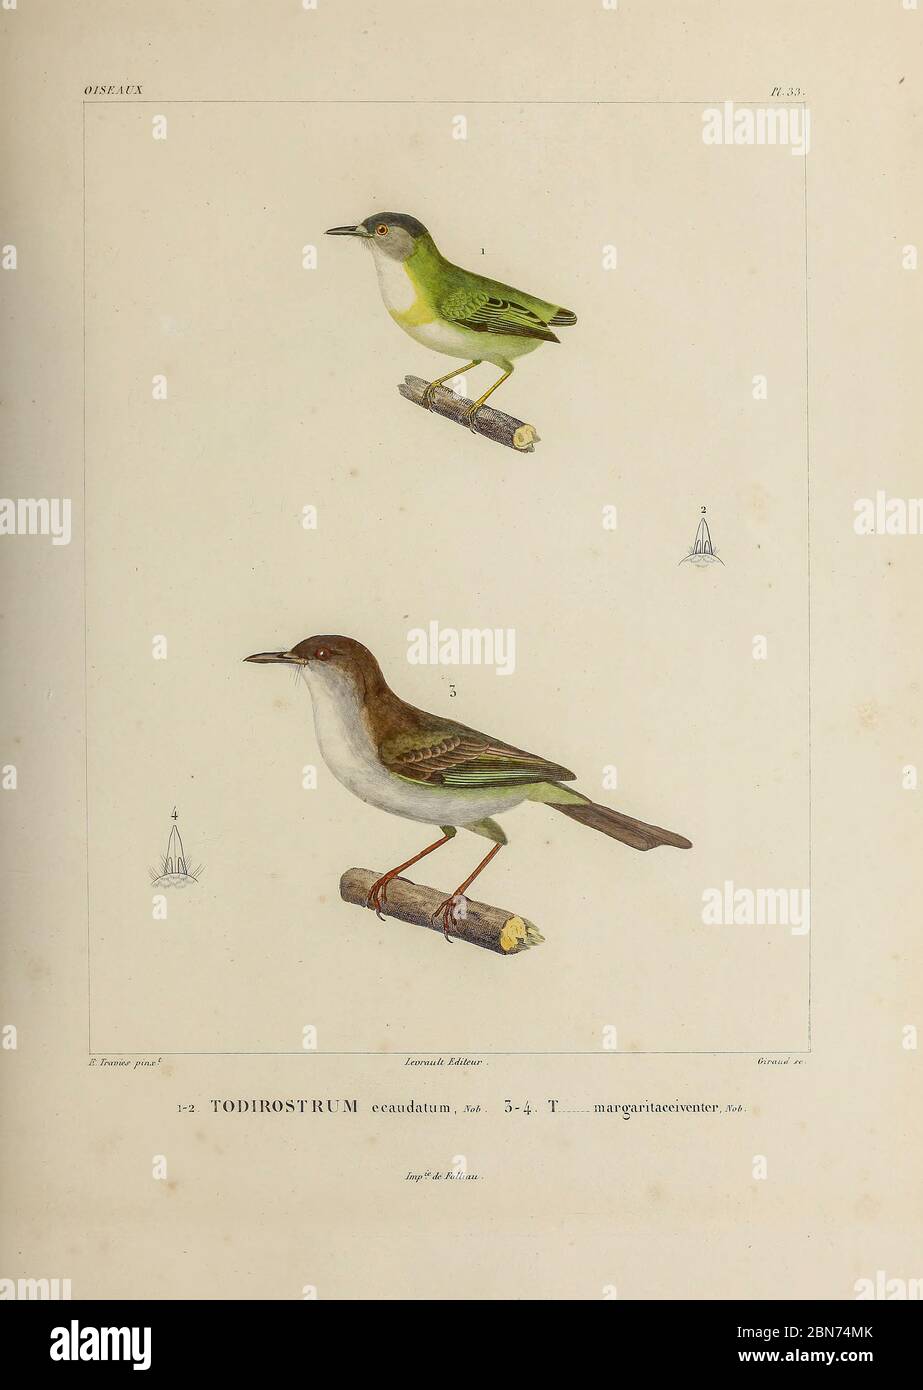 hand coloured sketch Top: short-tailed pygmy tyrant (Myiornis ecaudatus) [Here as Todirostrum ecaudatum]) Bottom: pearly-vented tody-tyrant (Hemitriccus margaritaceiventer [Here as Todirostrum margaritaceiventer]) From the book 'Voyage dans l'Amérique Méridionale' [Journey to South America: (Brazil, the eastern republic of Uruguay, the Argentine Republic, Patagonia, the republic of Chile, the republic of Bolivia, the republic of Peru), executed during the years 1826 - 1833] 4th volume Part 3 By: Orbigny, Alcide Dessalines d', d'Orbigny, 1802-1857; Montagne, Jean François Camille, 1784-1866; M Stock Photo